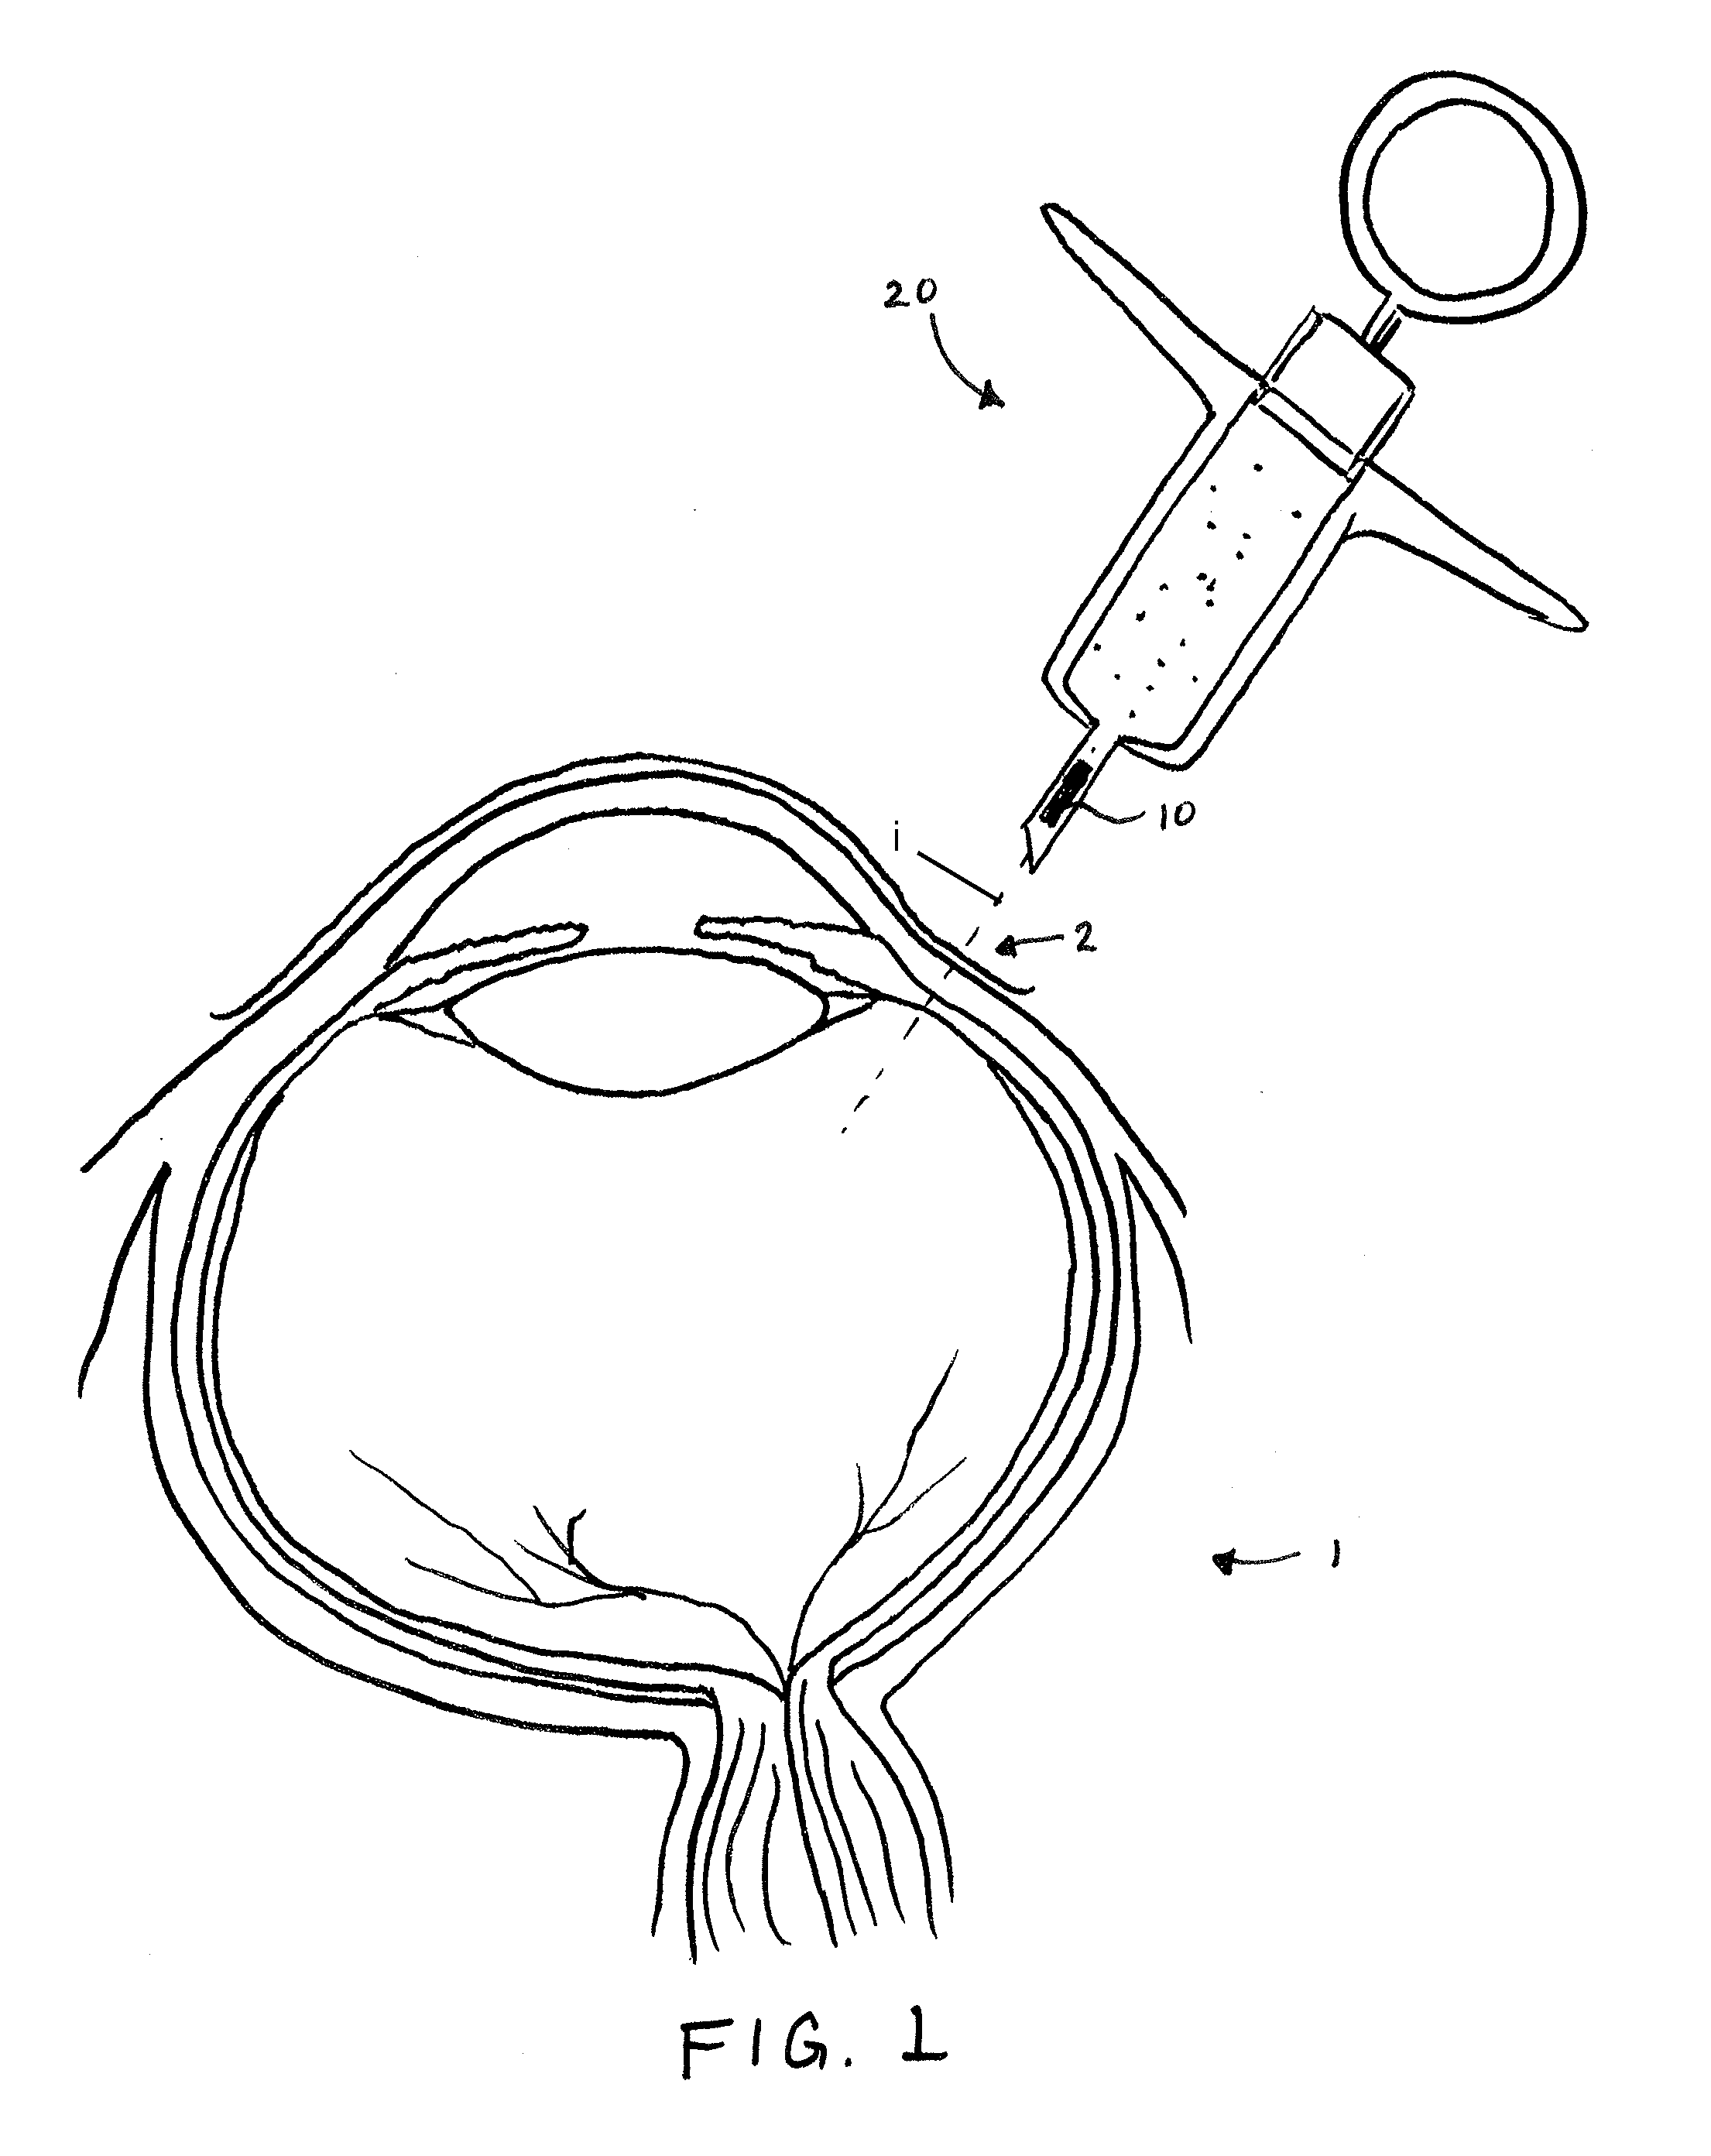 Methods and devices for implantation of intraocular pressure sensors